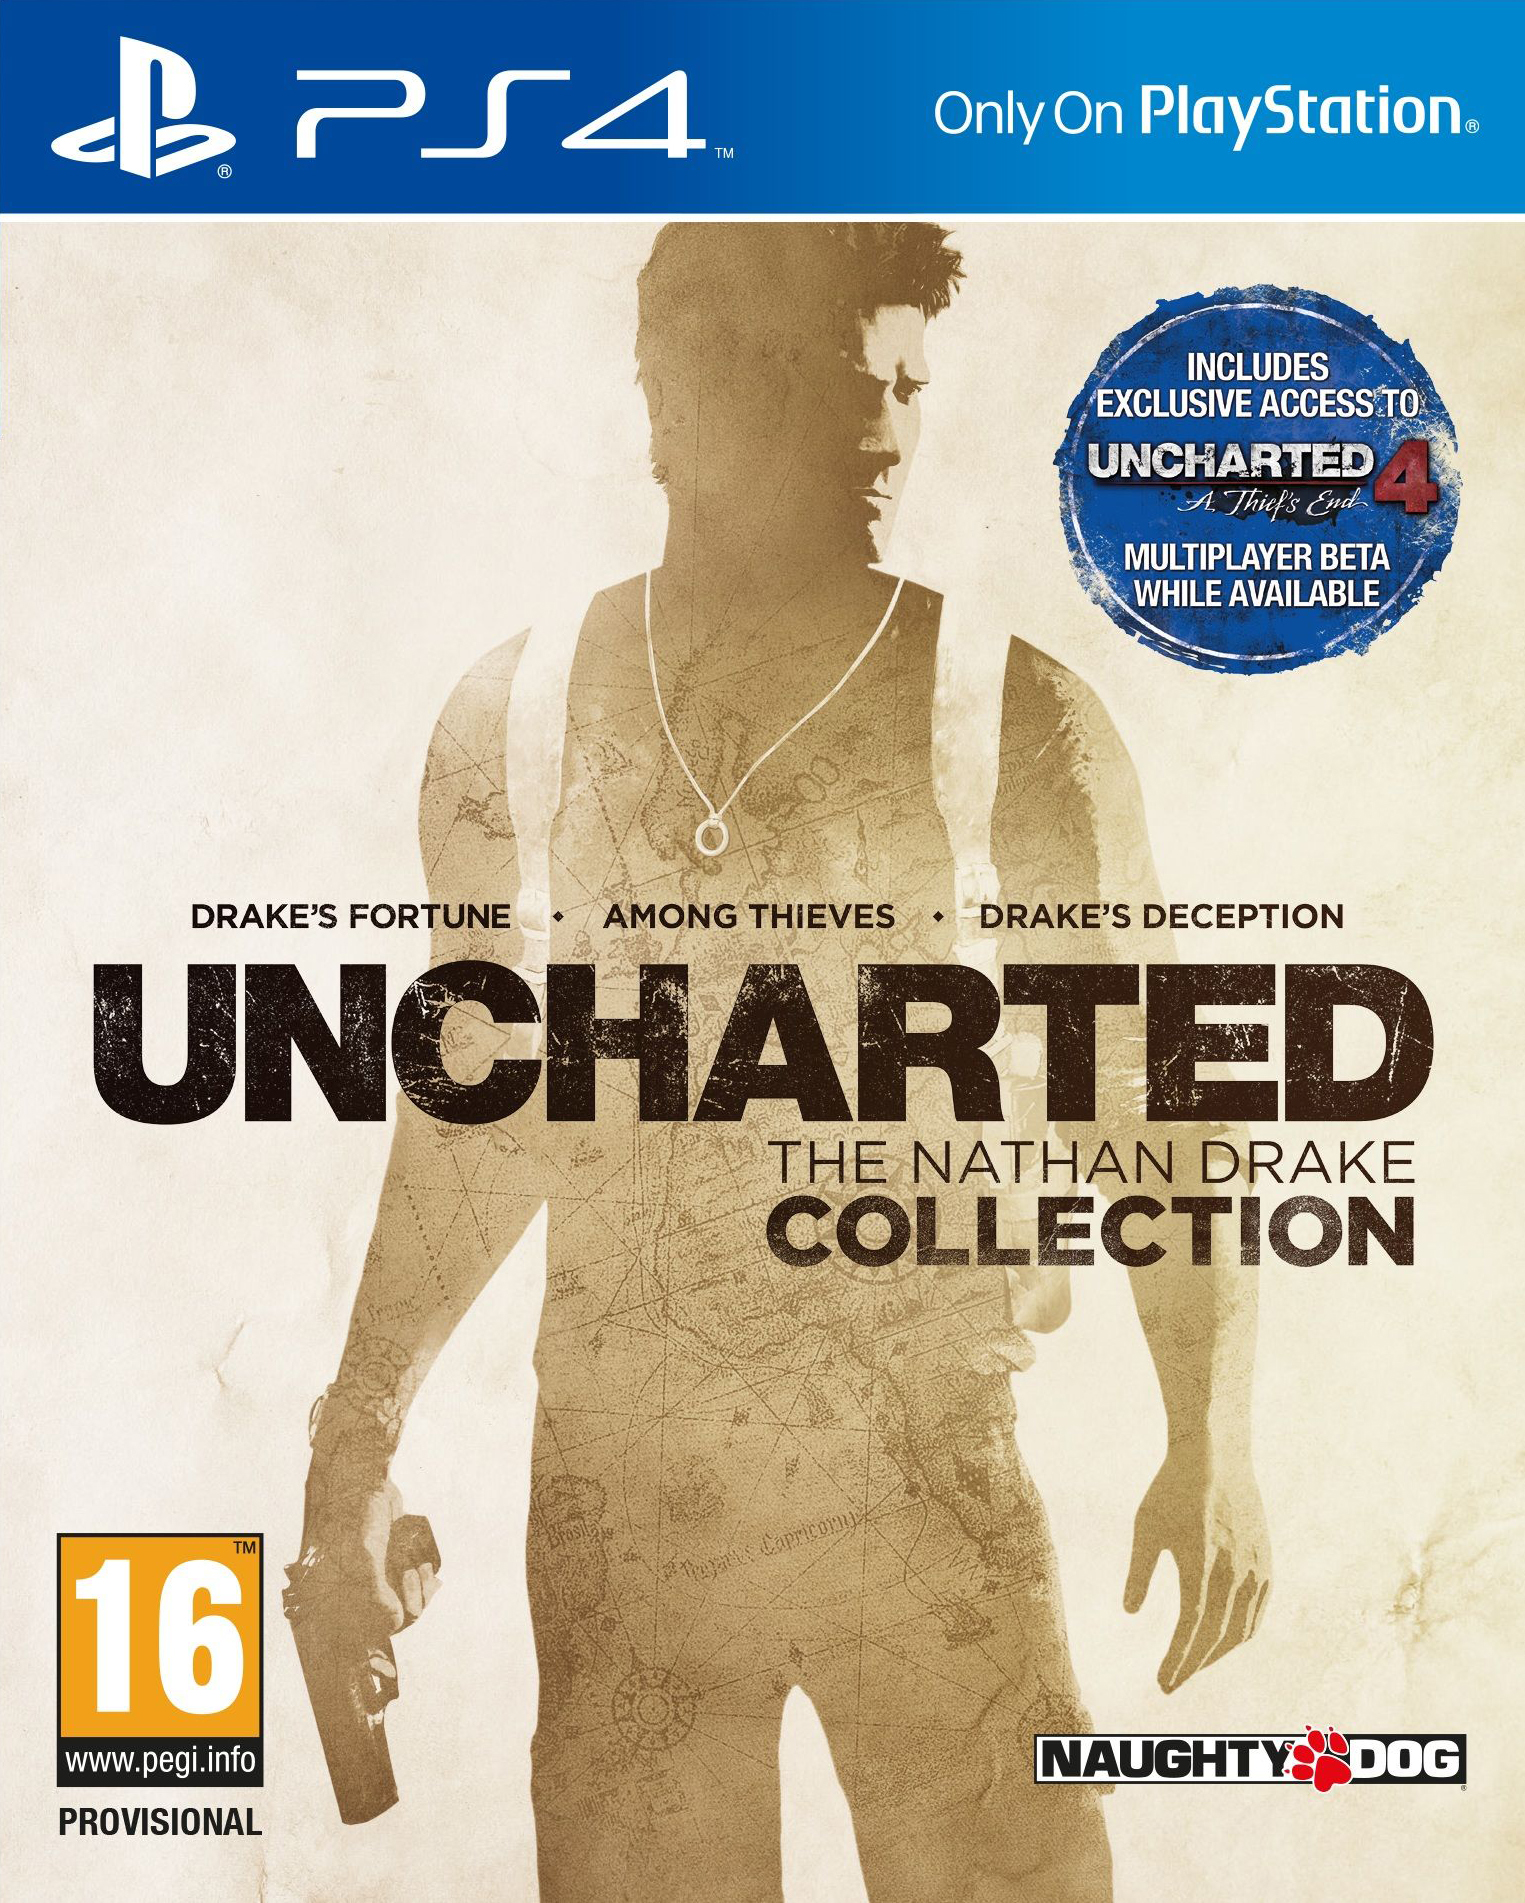 can you share the uncharted 3 game disc